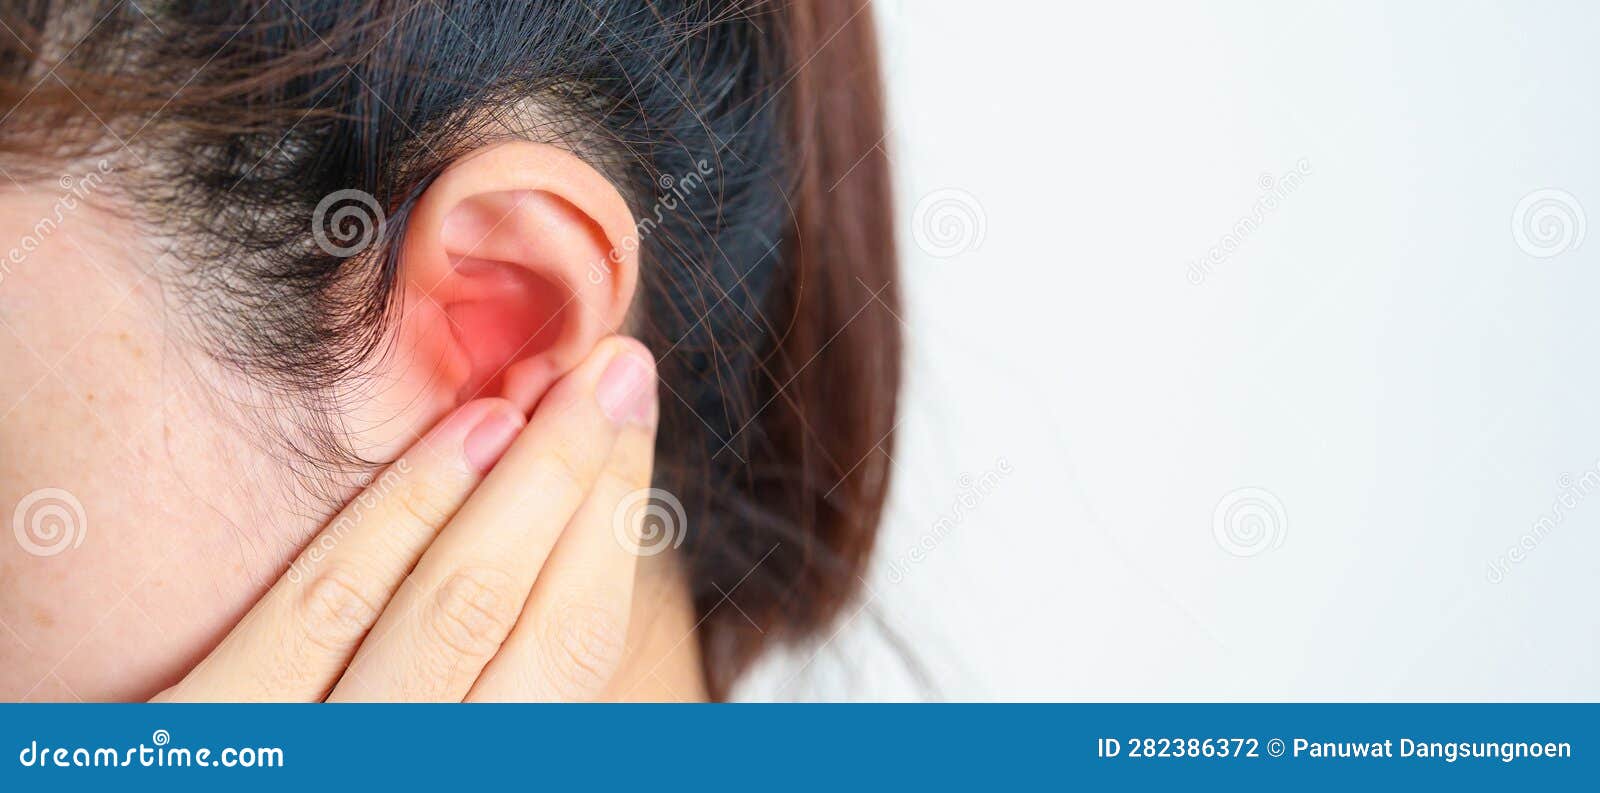 woman holding her painful ear. ear disease, atresia, otitis media, inflation, pertorated eardrum, meniere syndrome,